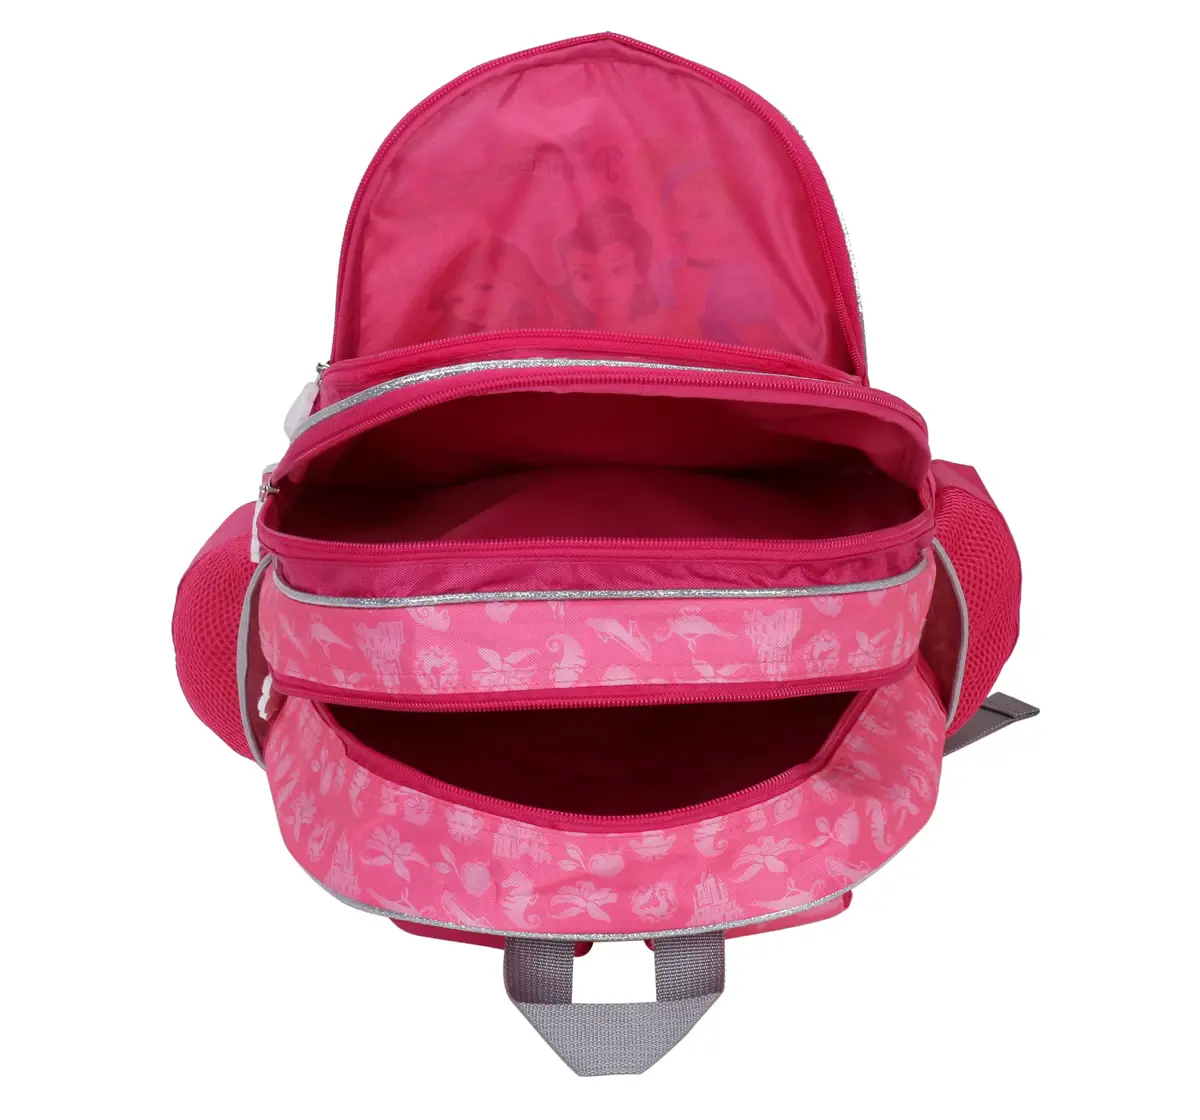 Simba Princess Find Your Fate 16 Backpack Multicolor 3Y+